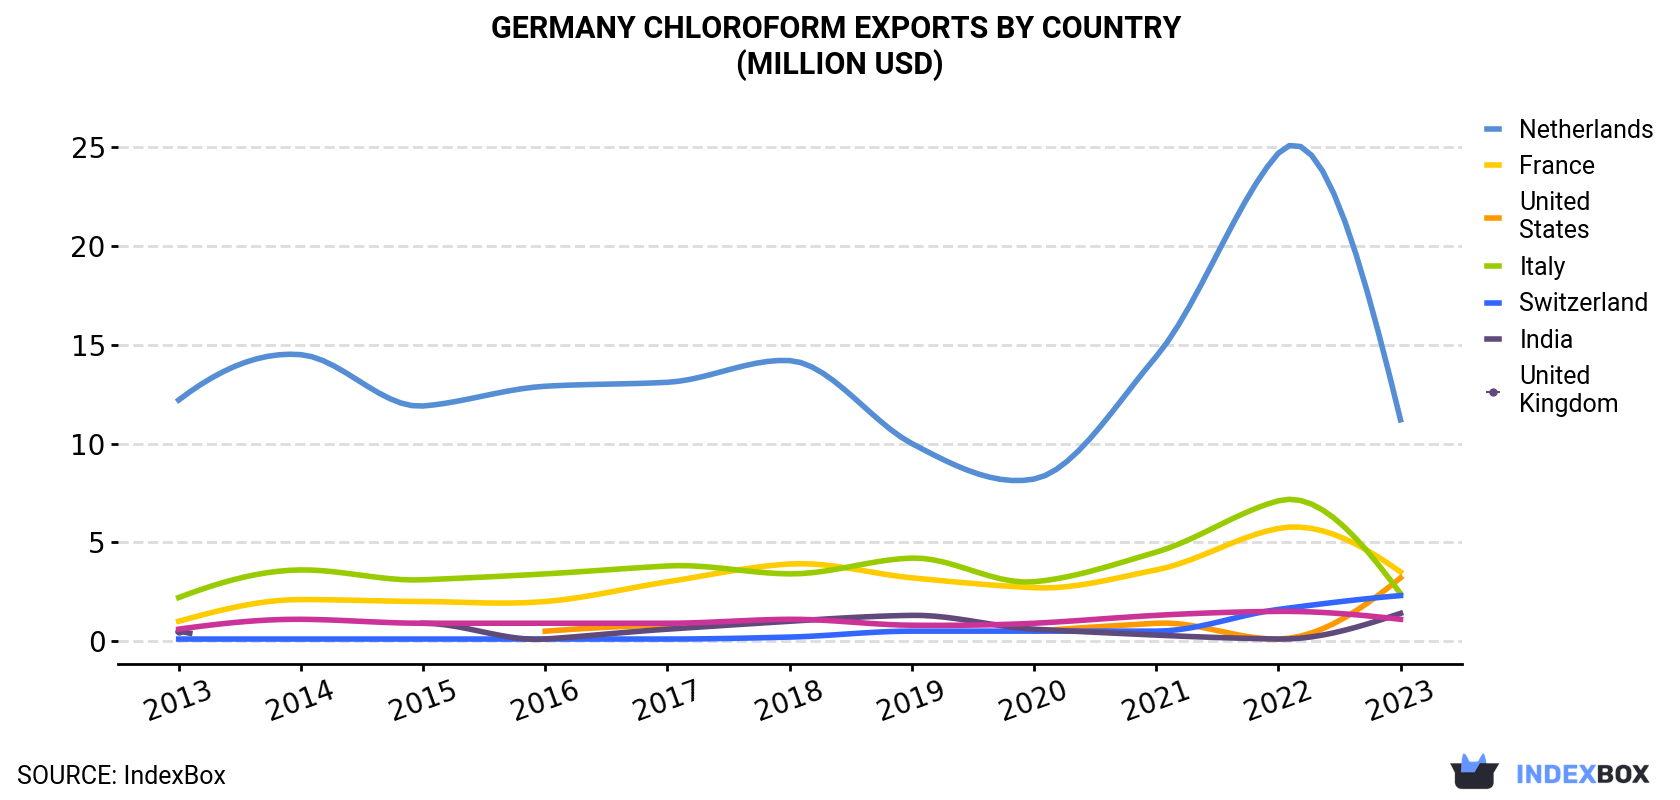 Germany Chloroform Exports By Country (Million USD)